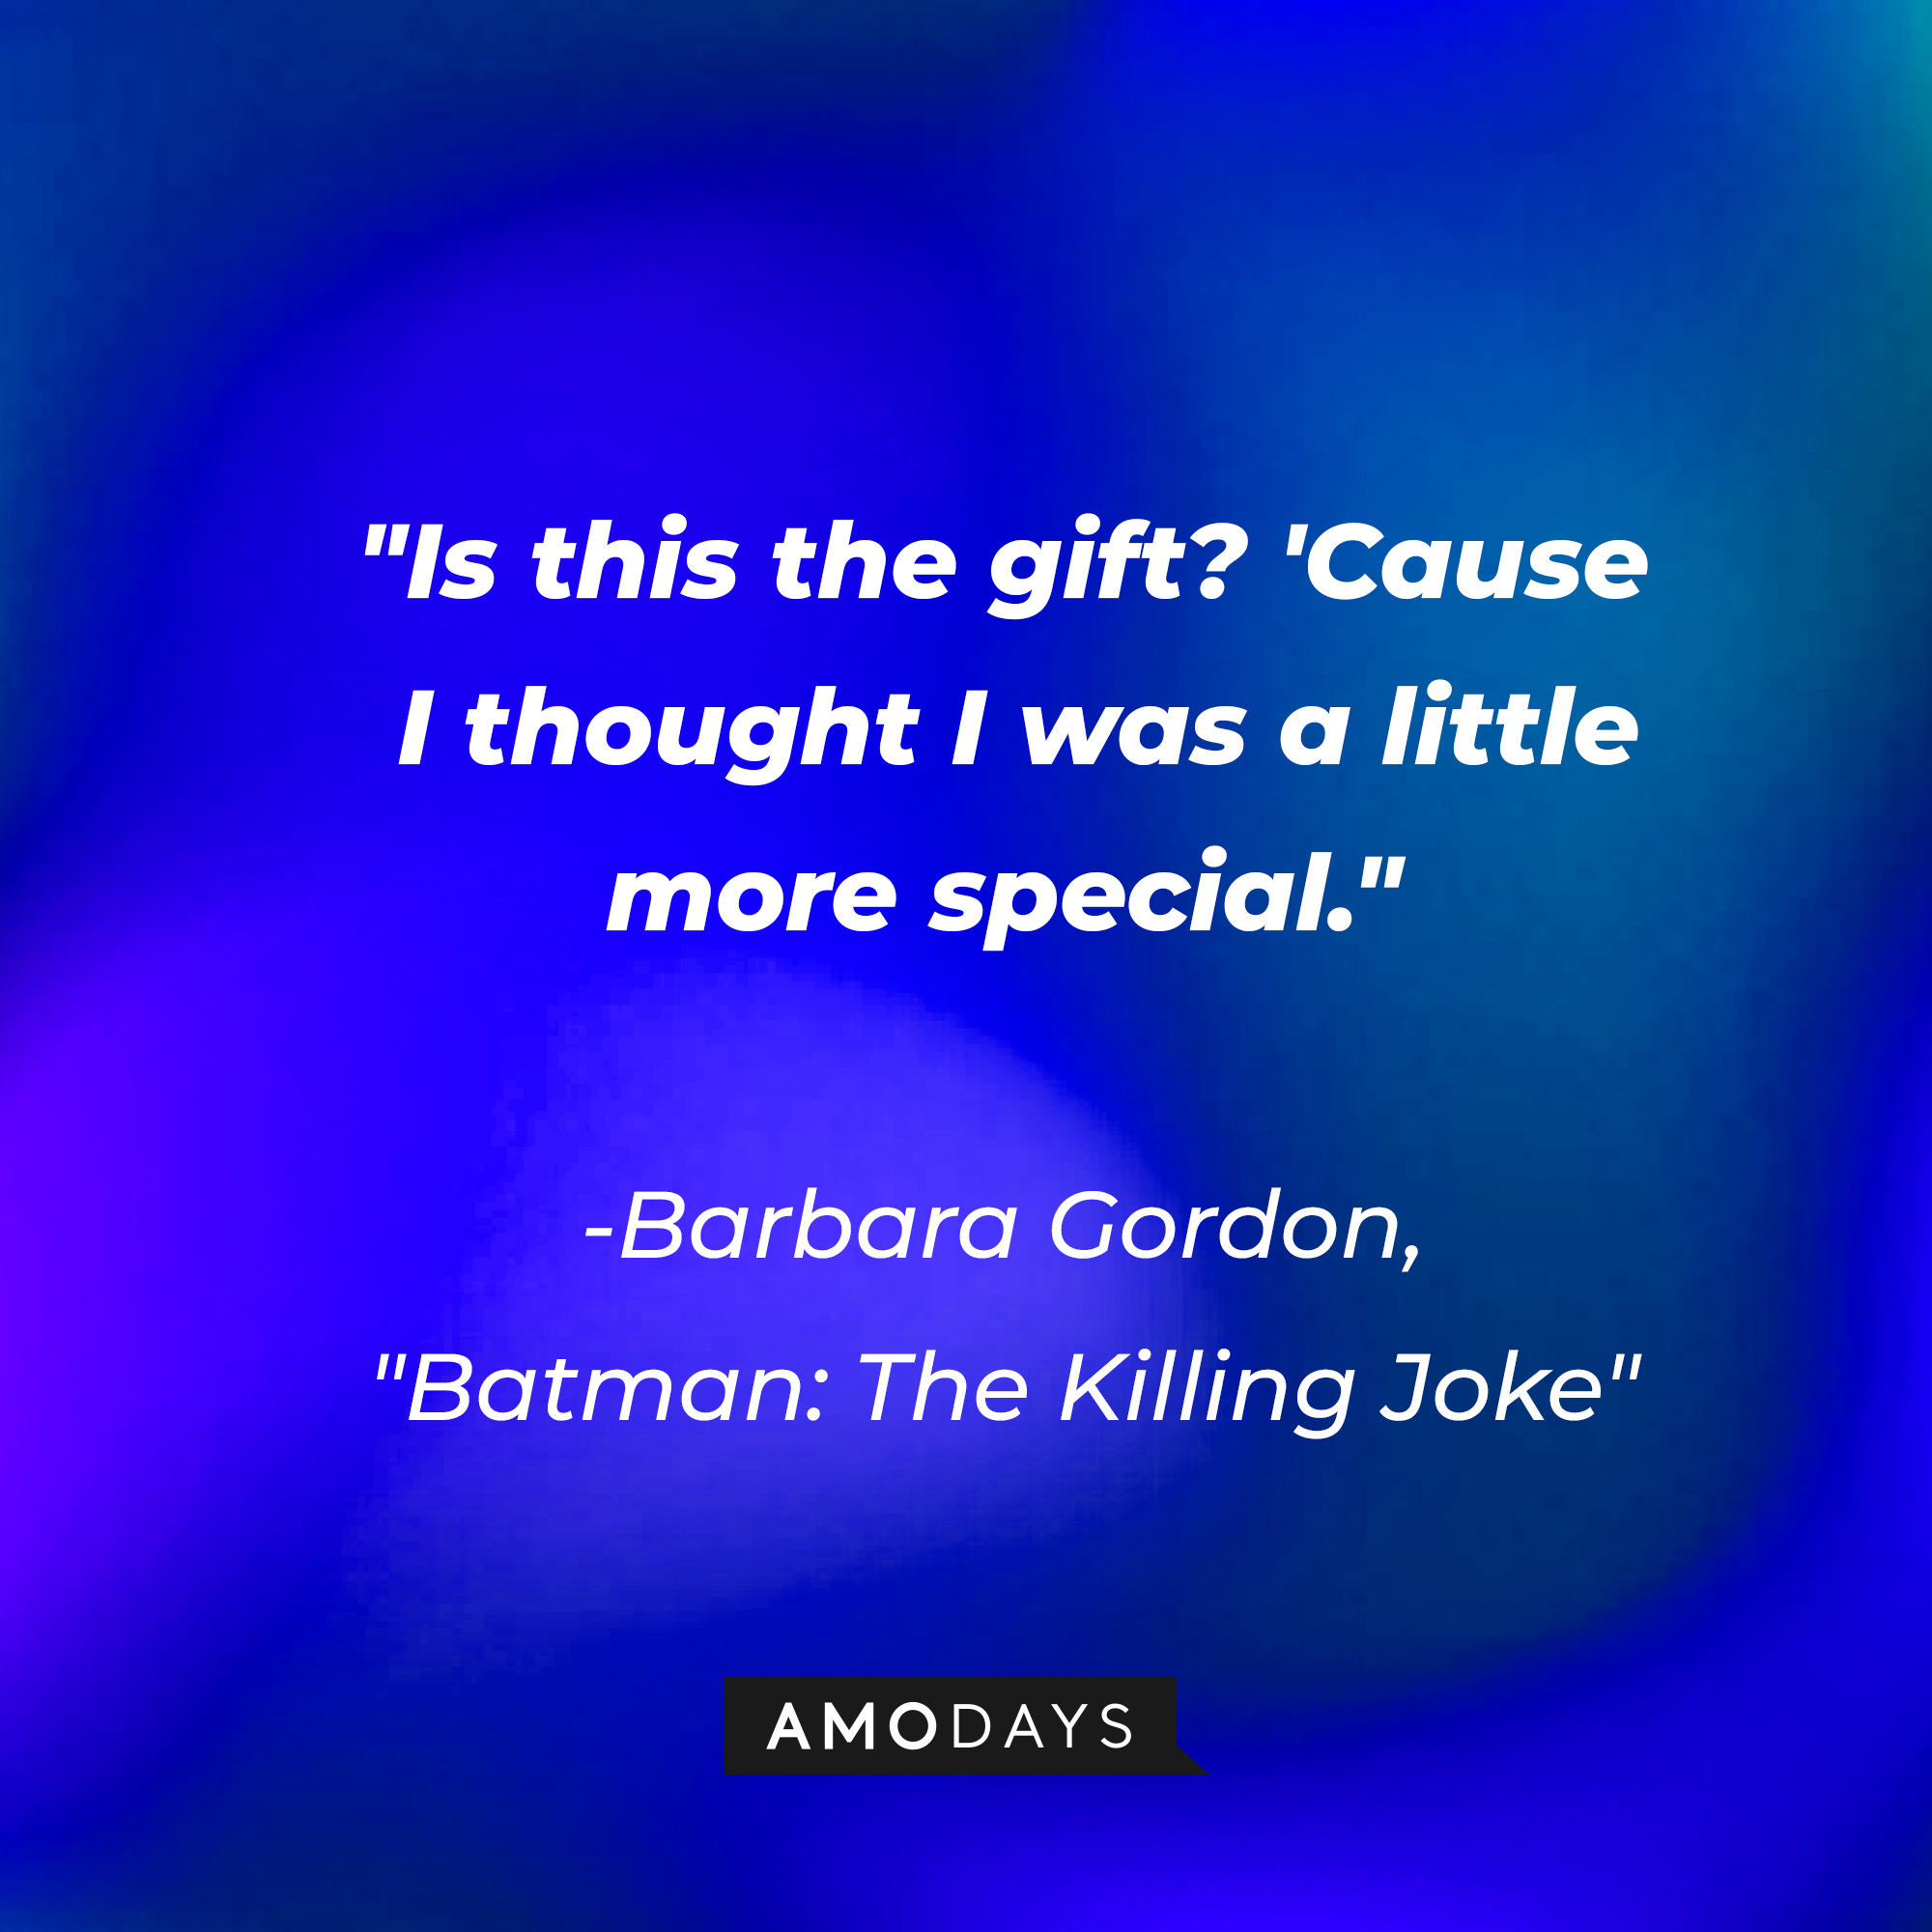 Barbara Gordon's quote from the "Batman: The Killing Joke" animated film: "Is this the gift? 'Cause I thought I was a little more special." | Source: AmoDays